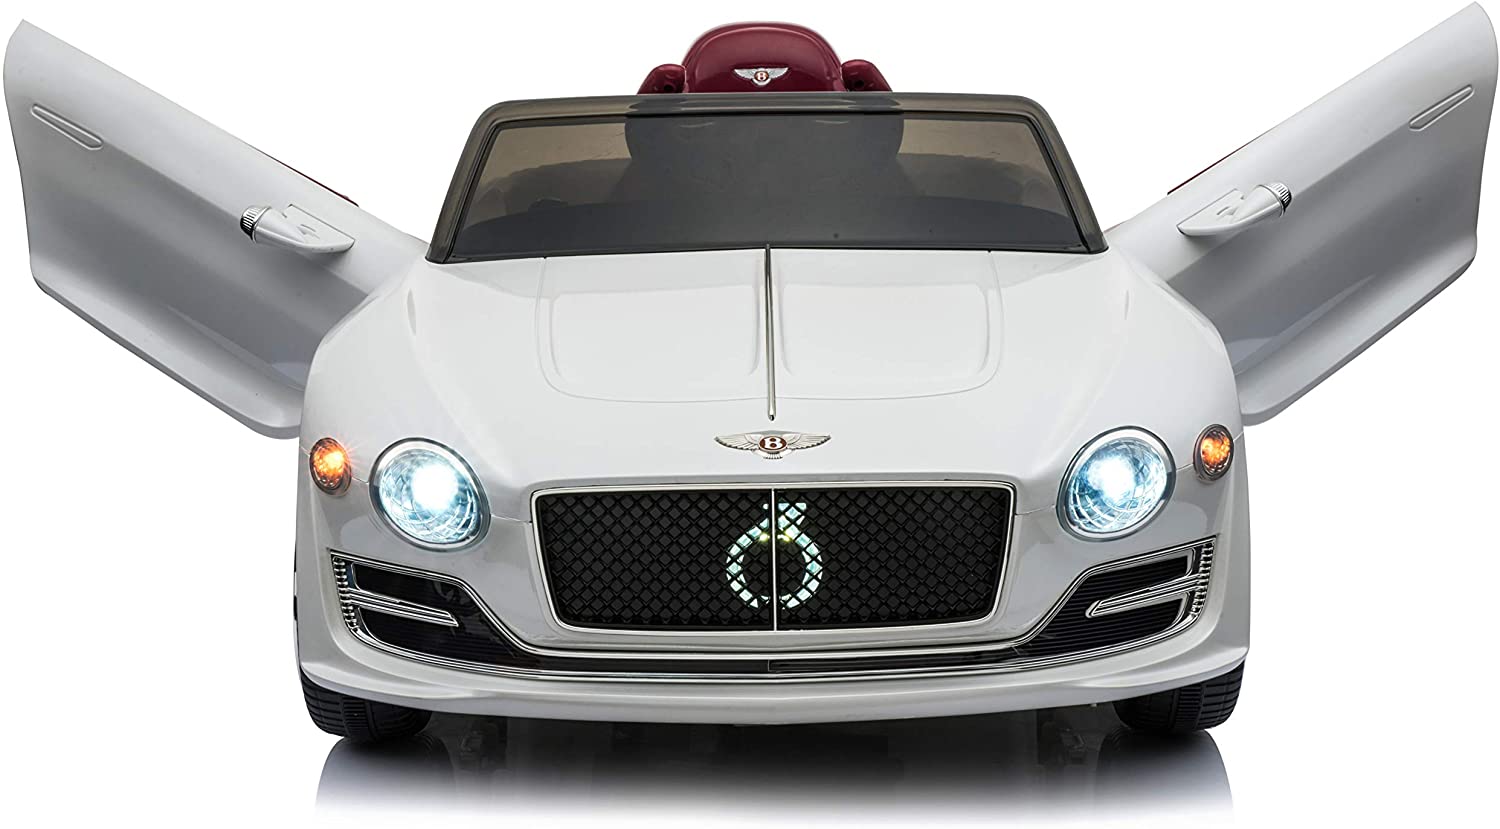 White 12v electric Bentley GT EXP12 convertible sports car for kids with upswing doors.